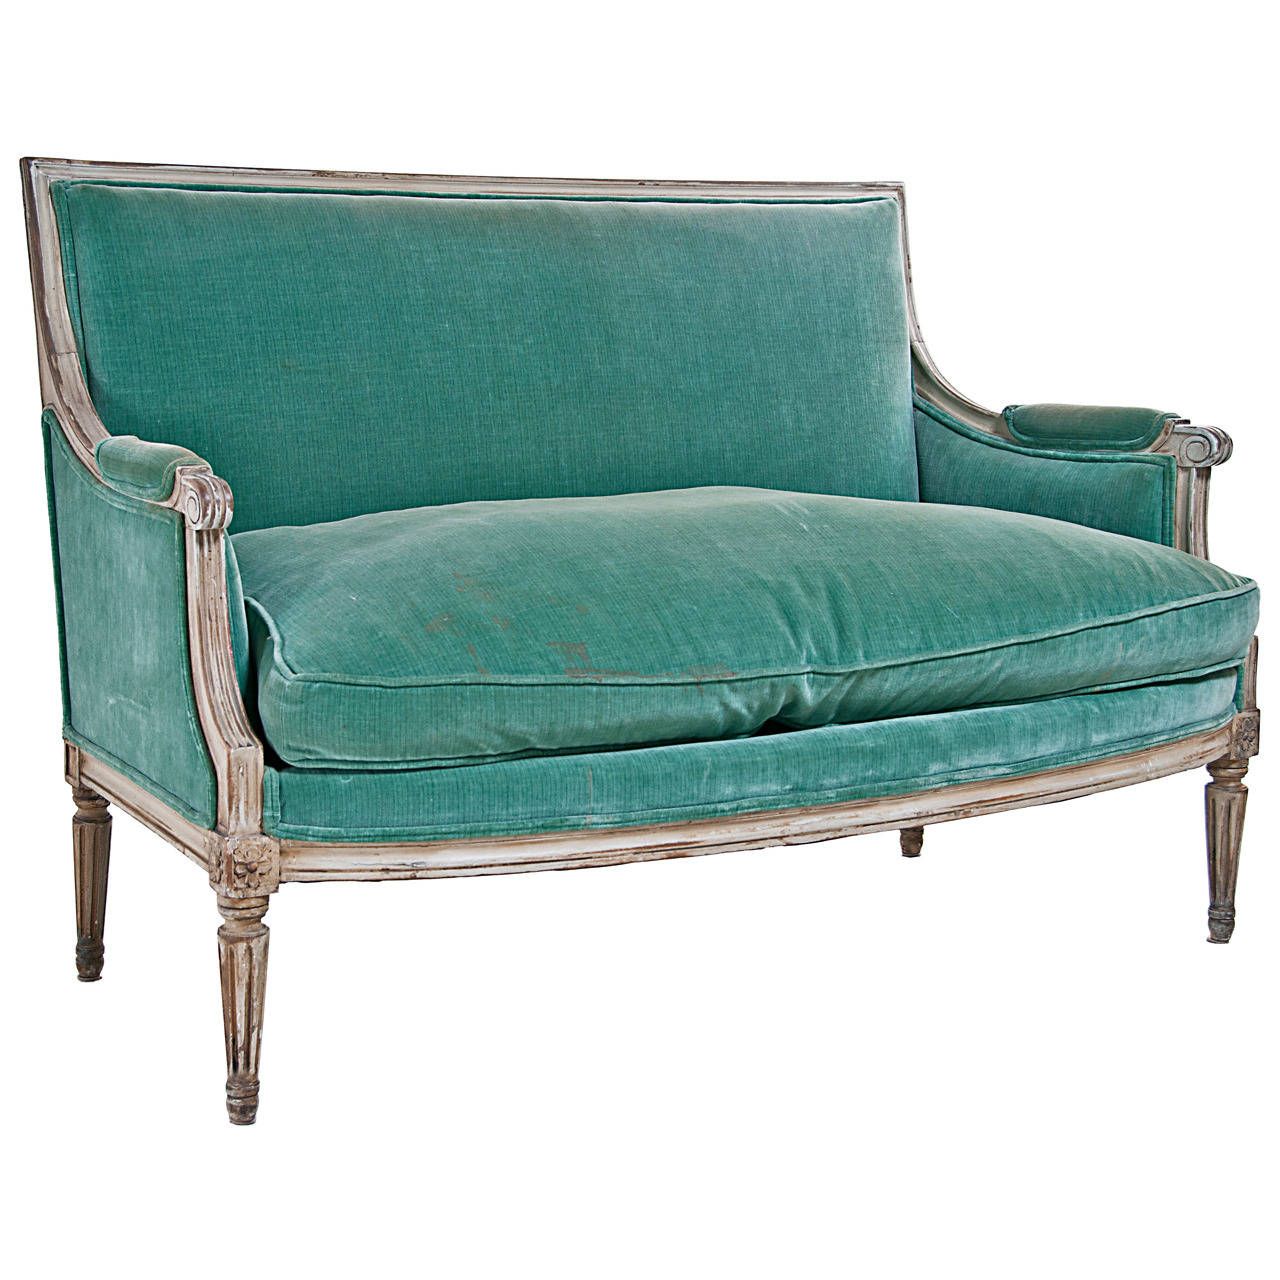 Antique and Vintage Sofas – 9,700 For Sale at 1stdibs